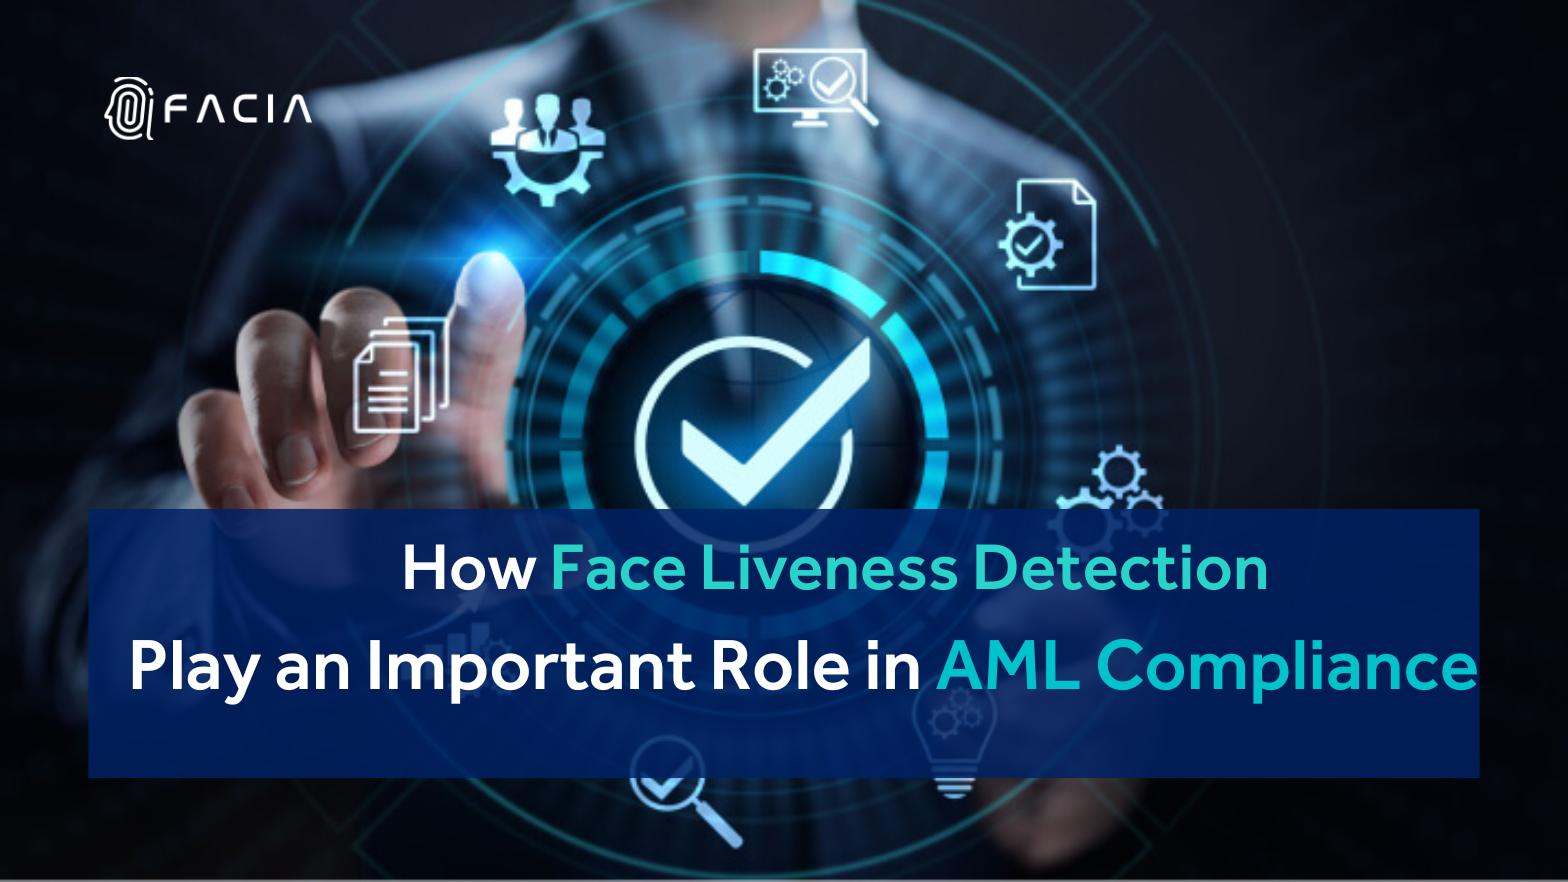 Face liveness detection for AML compliance